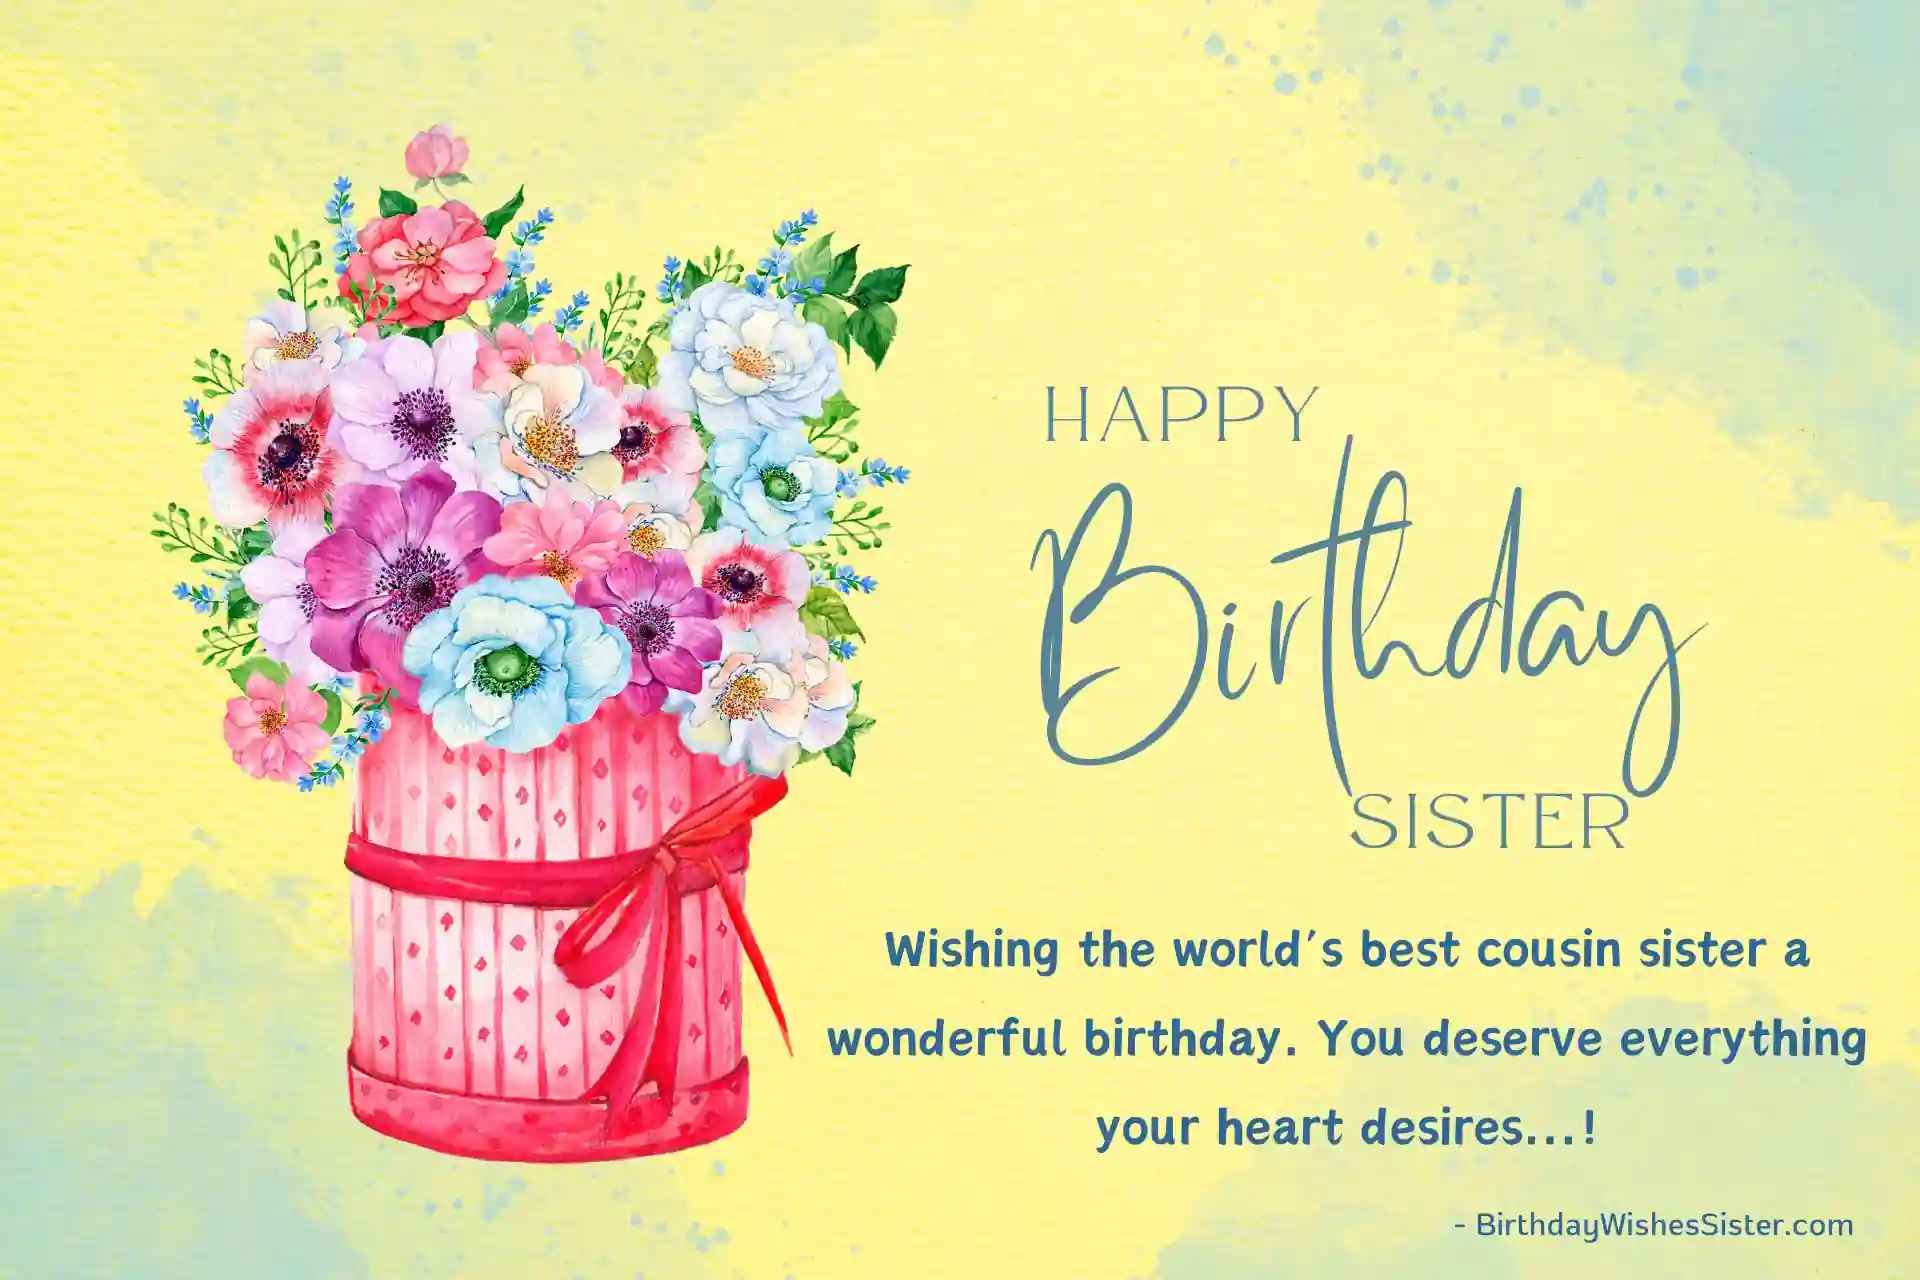 Birthday Thoughts For Cousin Sister, Sister Birthday Wishes Thoughts